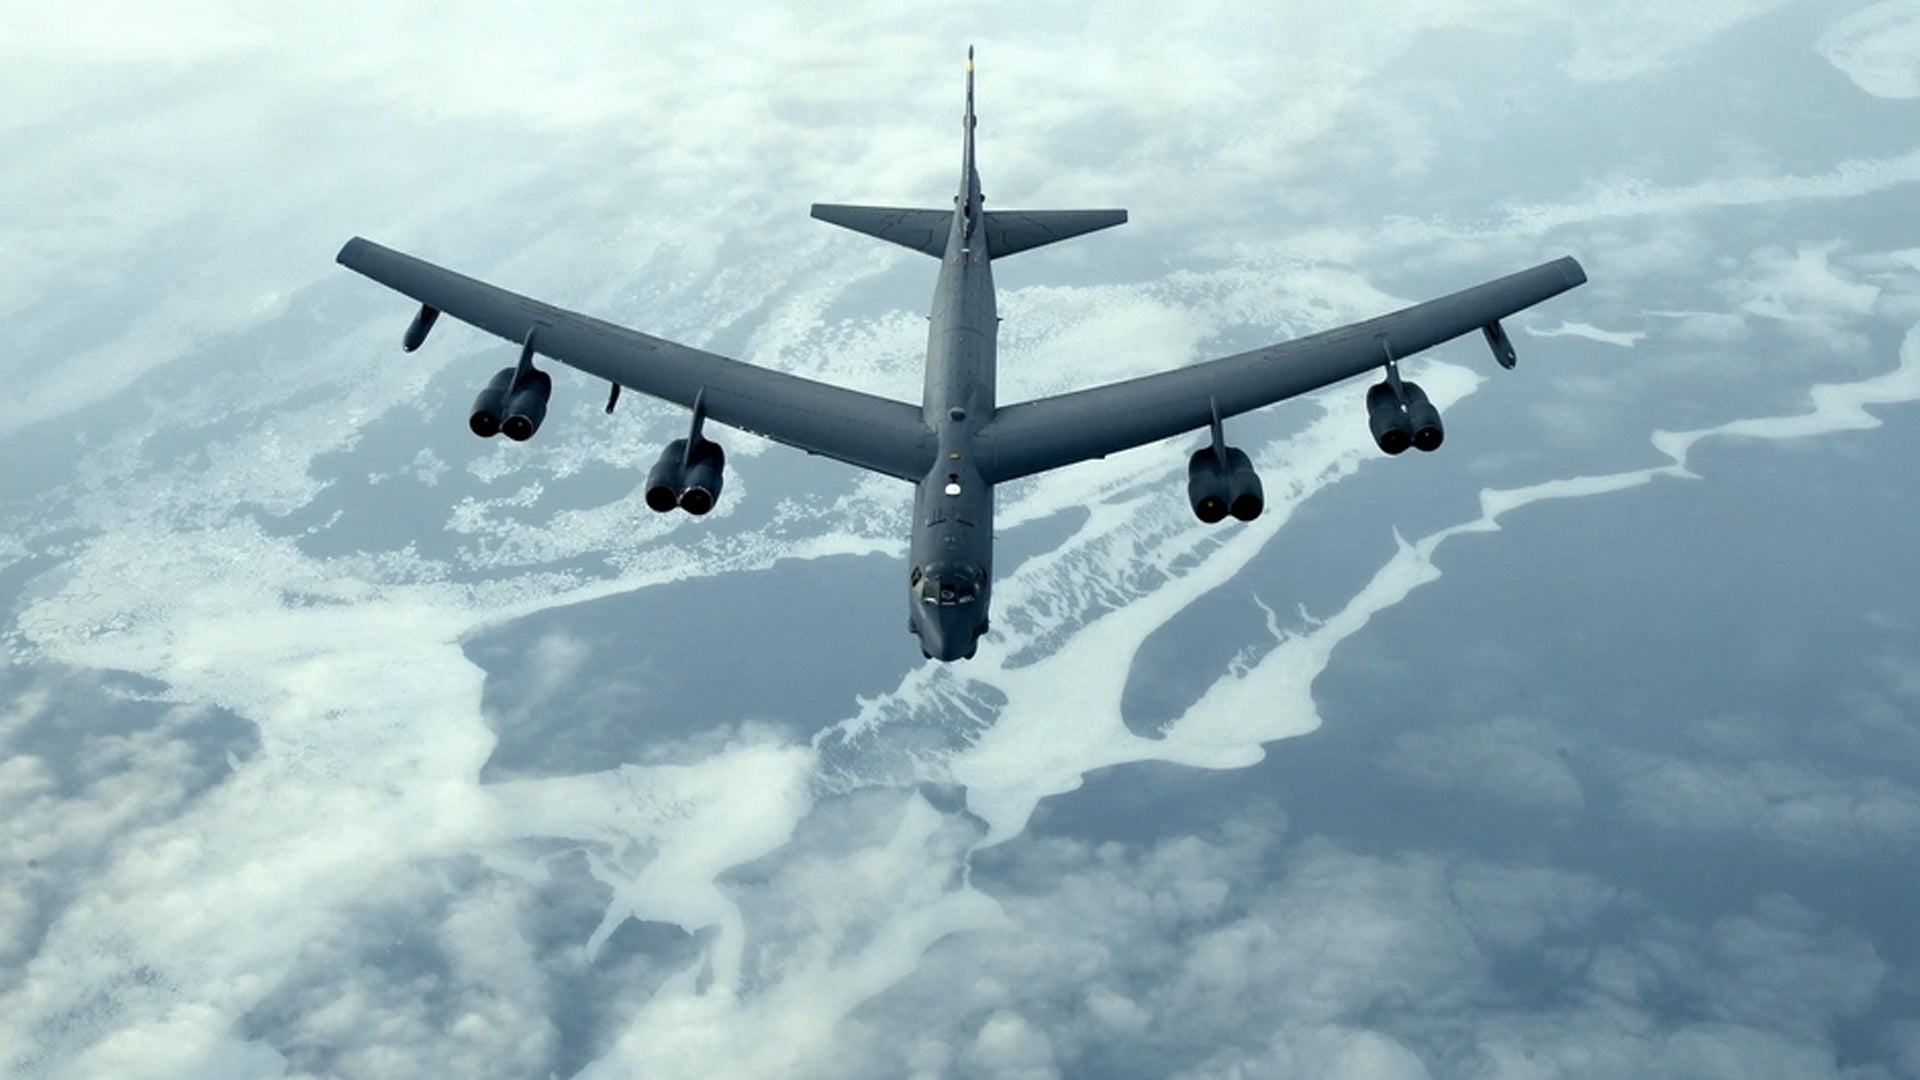 Watch an Air Force B-52 Stratofortress go toe-to-toe with a flock of birds